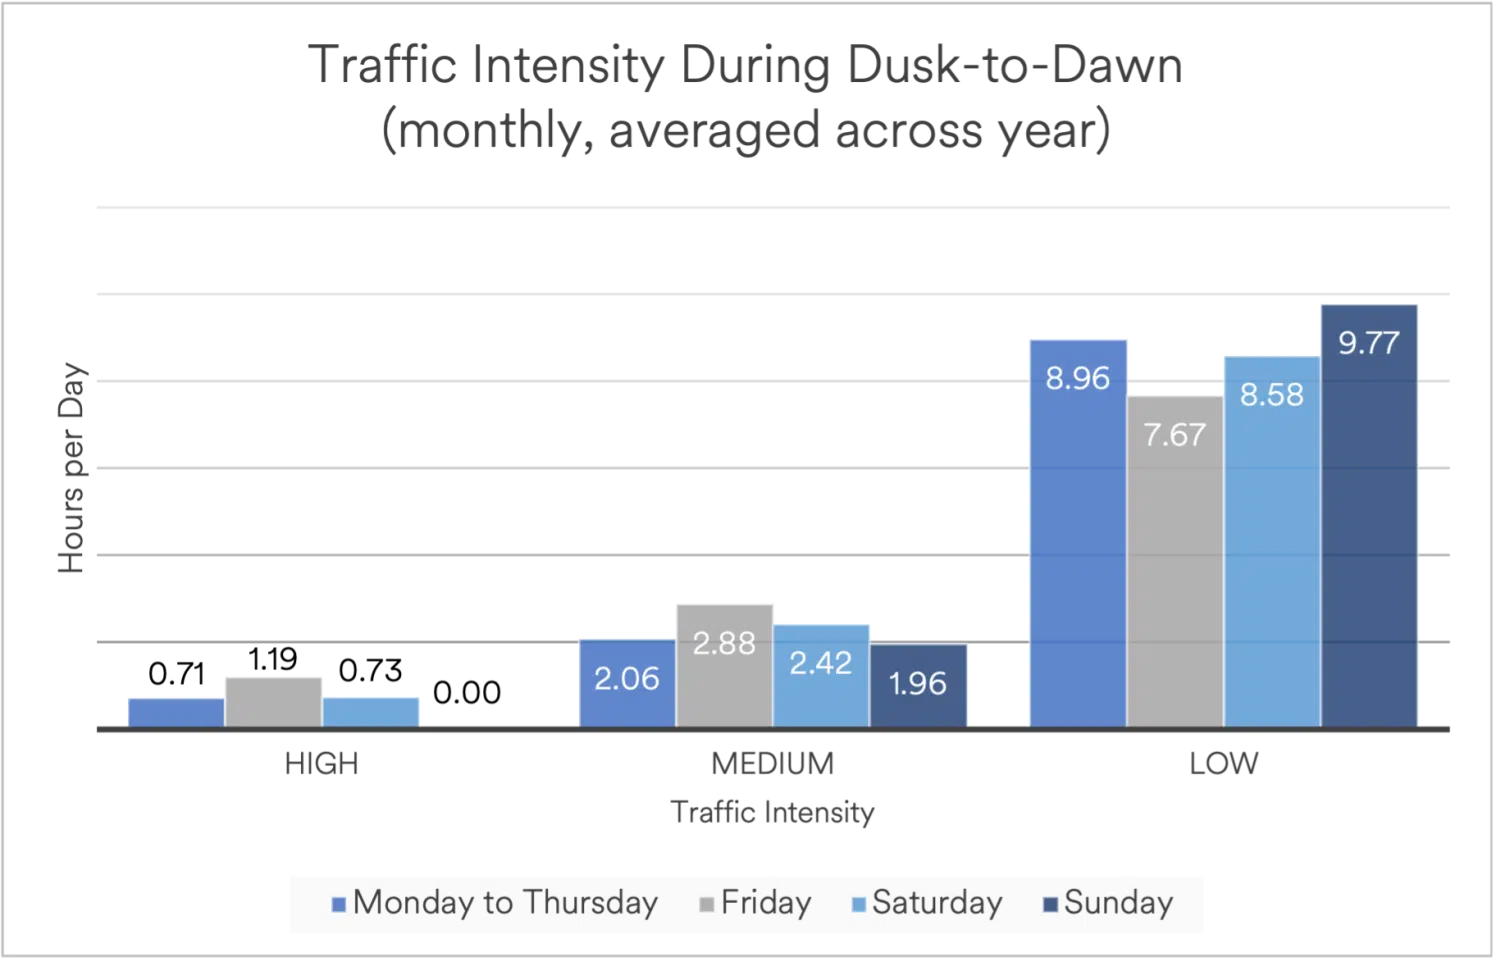 A chart showing the traffic intensity changes during dusk-to-dawn periods during a month.